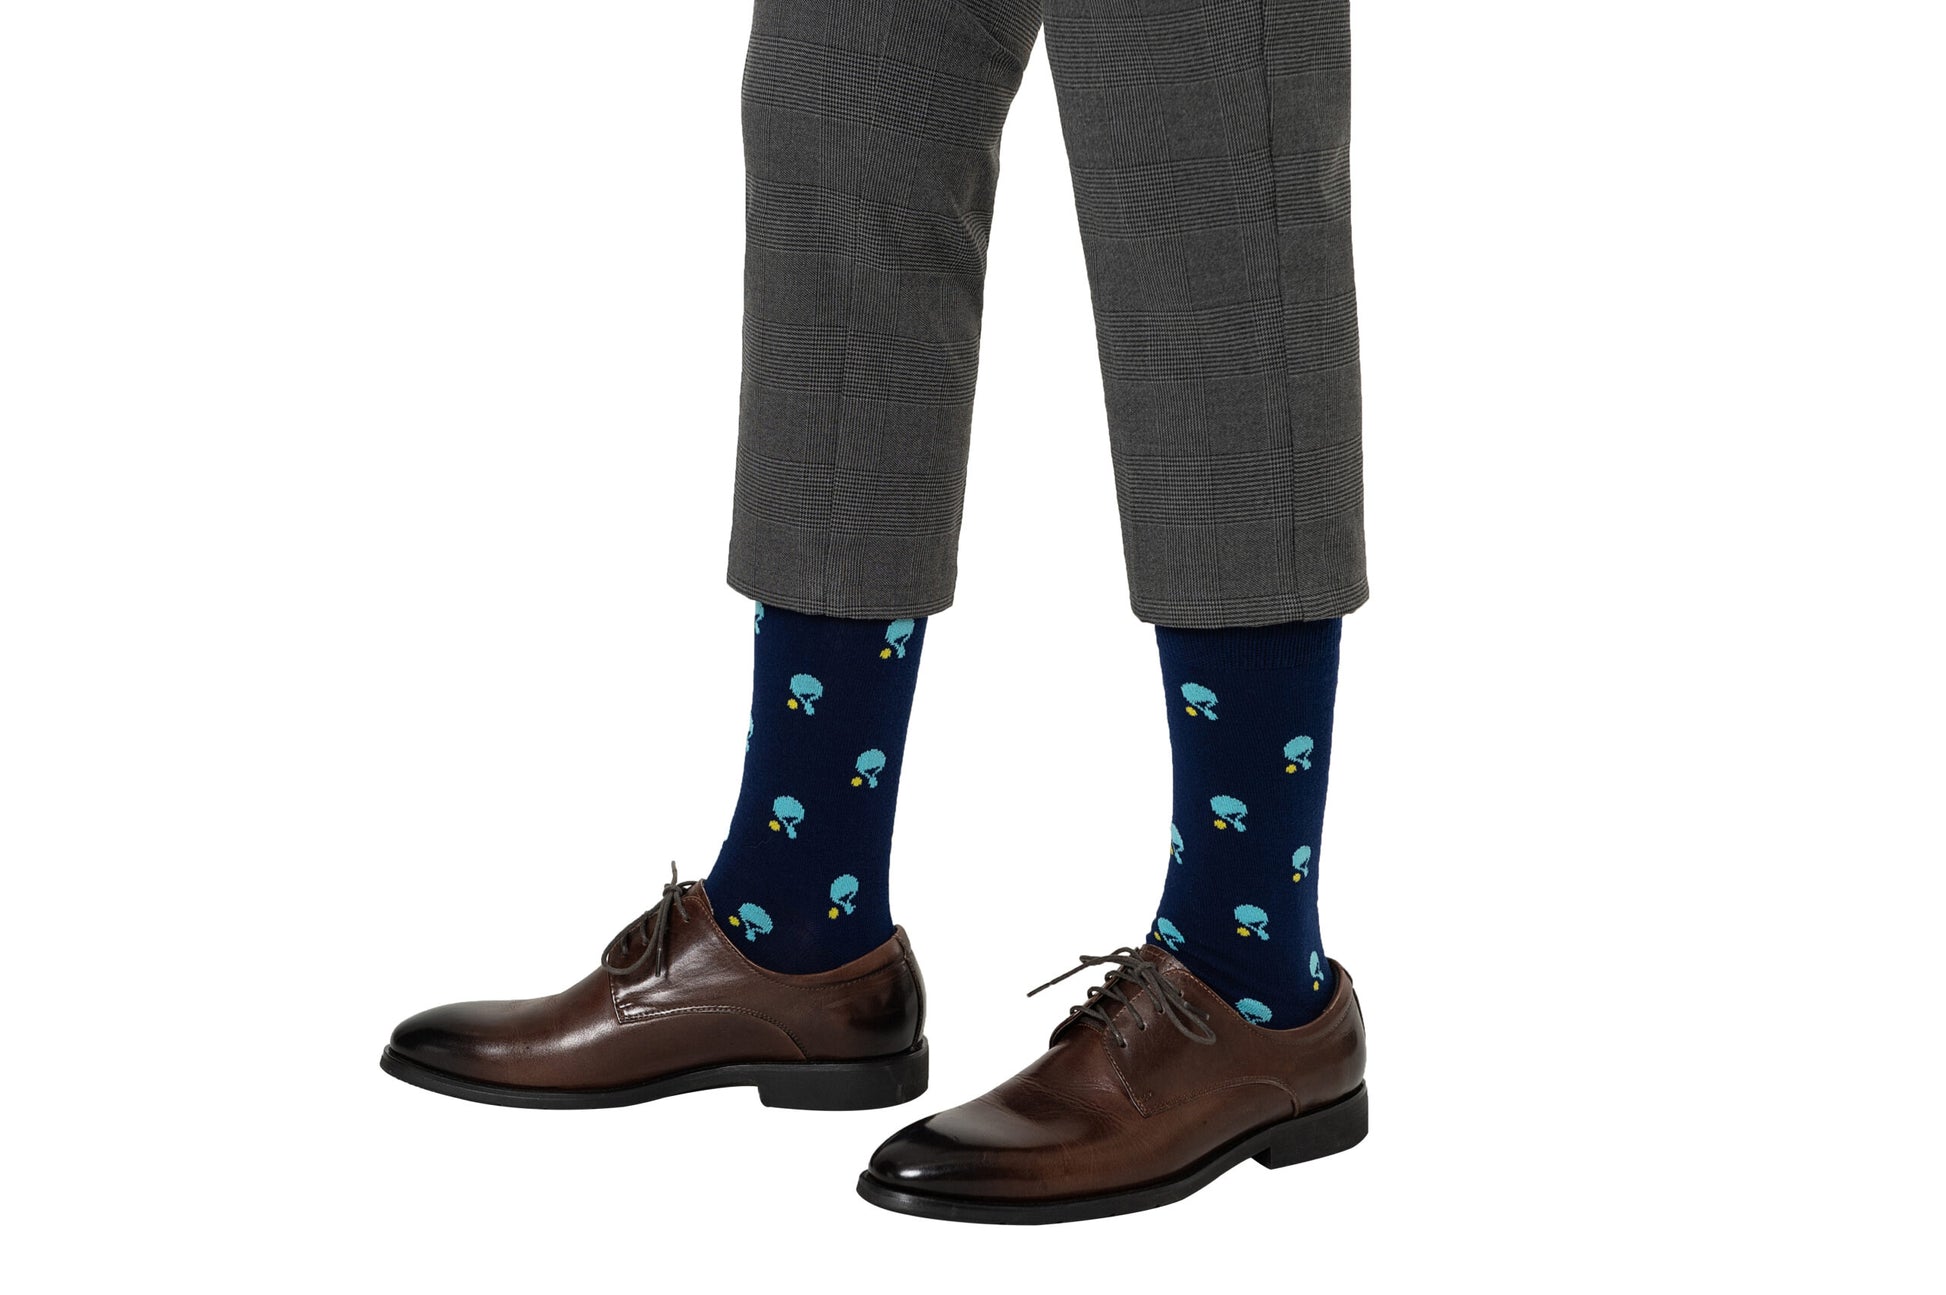 Man wearing gray pants, brown dress shoes, and dark blue Table Tennis Socks with a colorful mushroom pattern—exuding a certain sense of perfection.